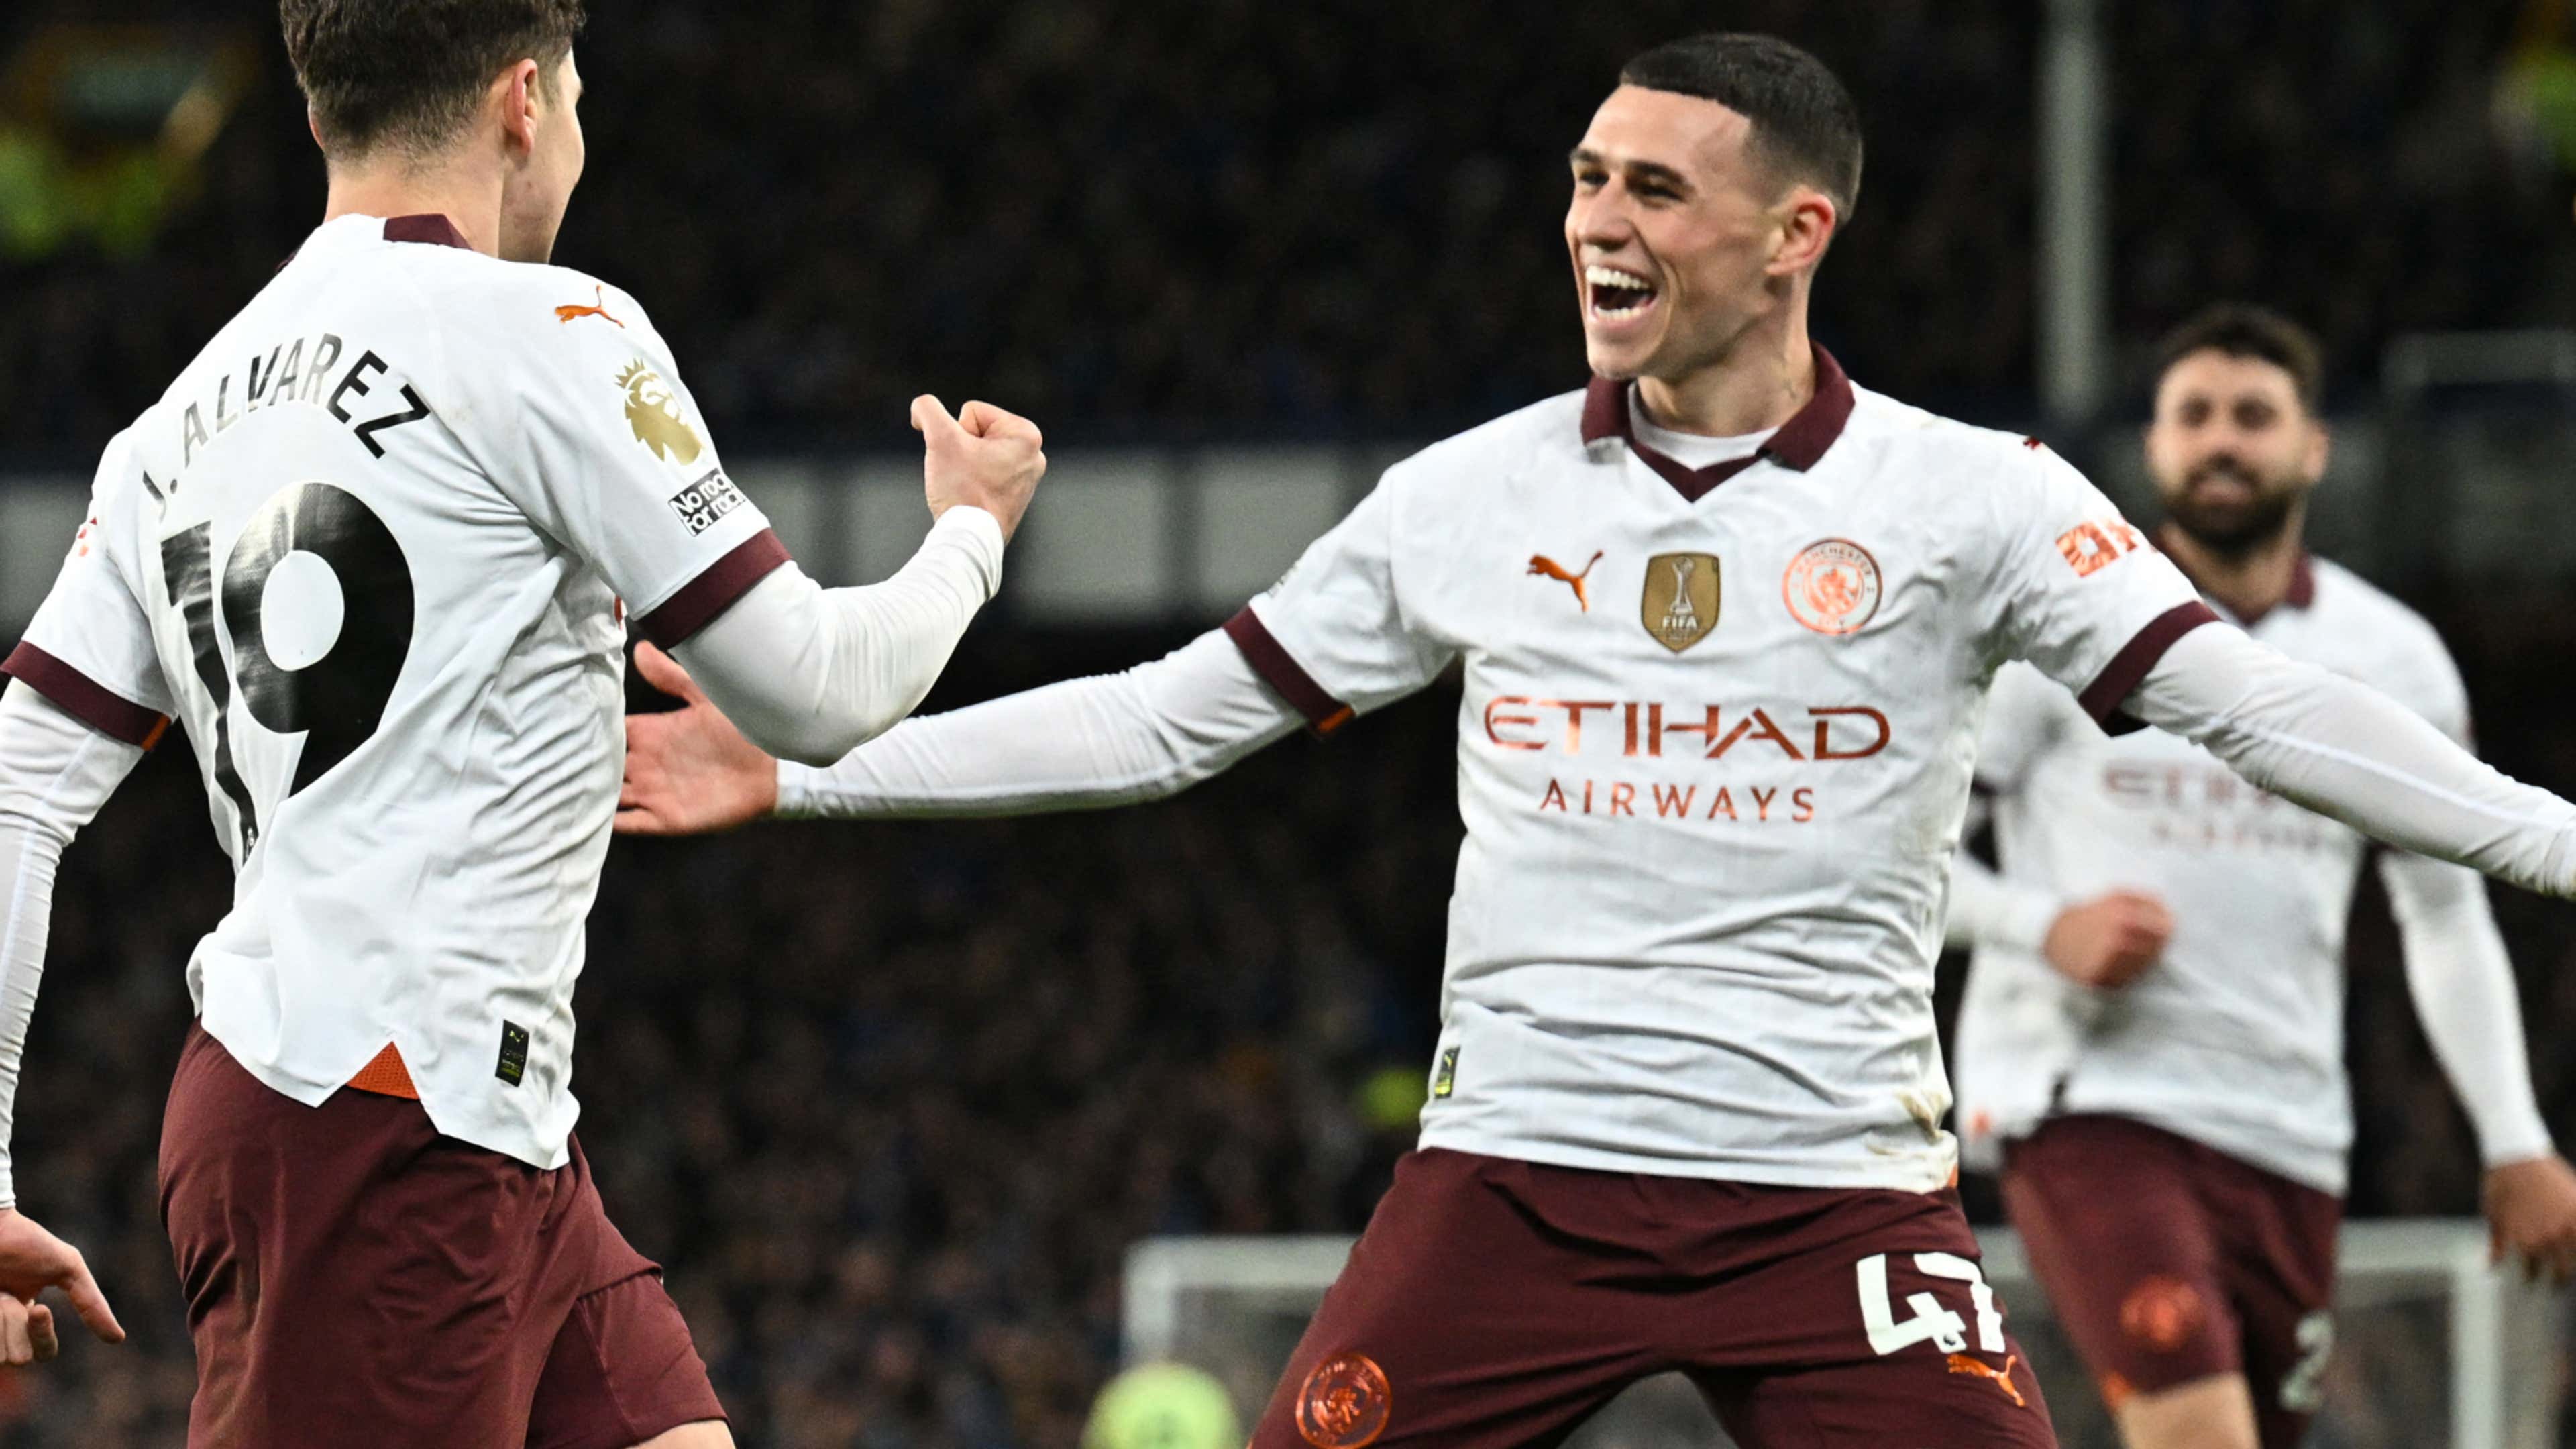 Merry Comeback: Man United, Chelsea, and Man City Pull Incredible Comebacks in EPL GW 19 Results